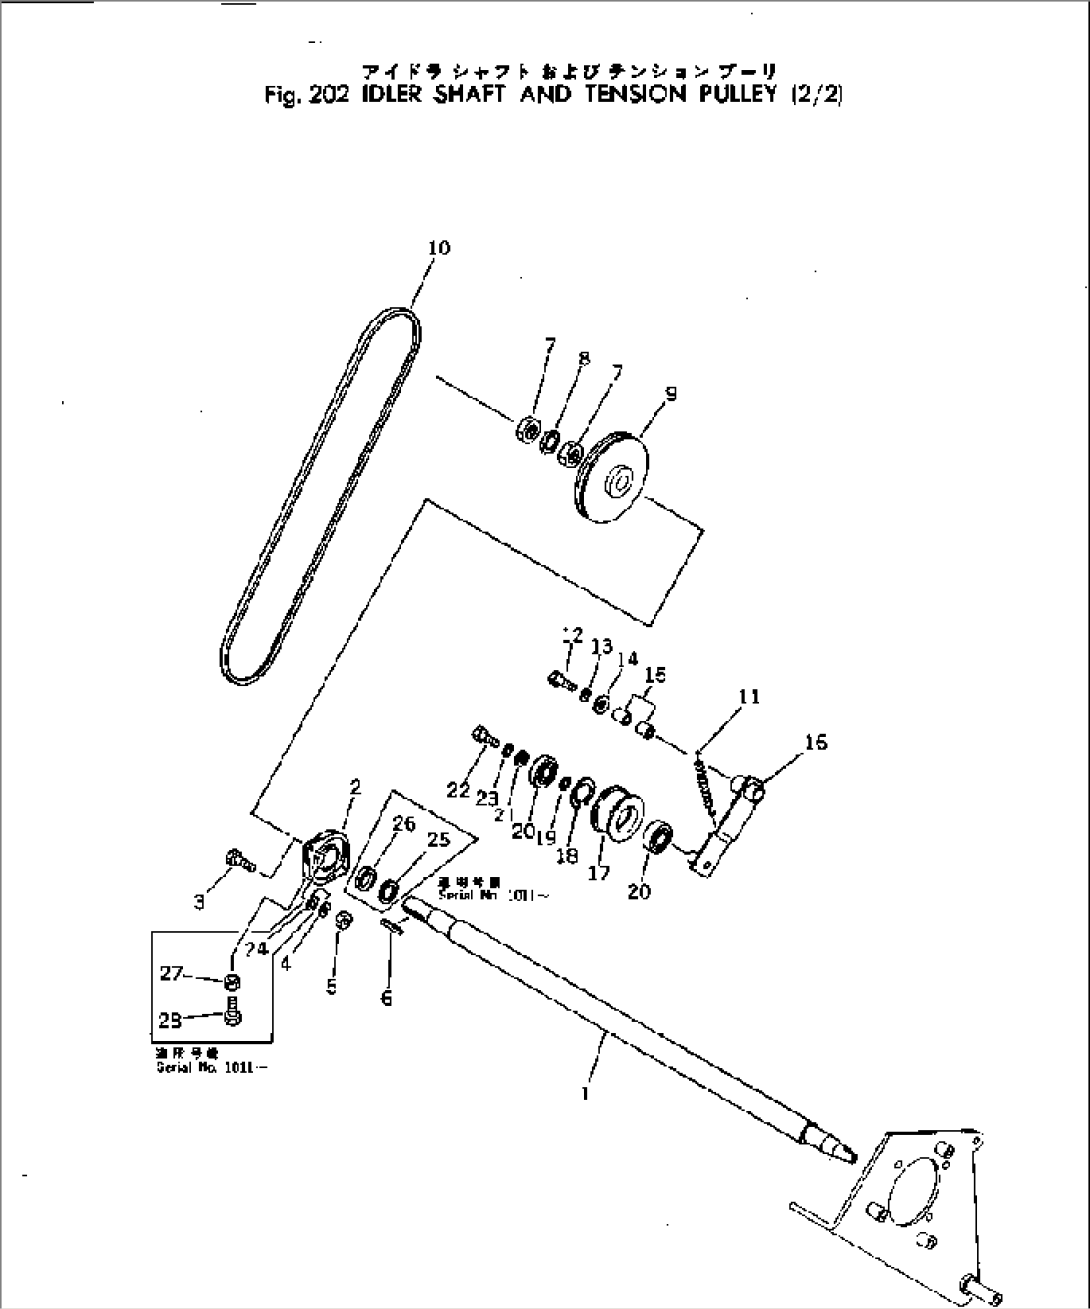 IDLER SHAFT AND TENSION PULLEY (2/2)